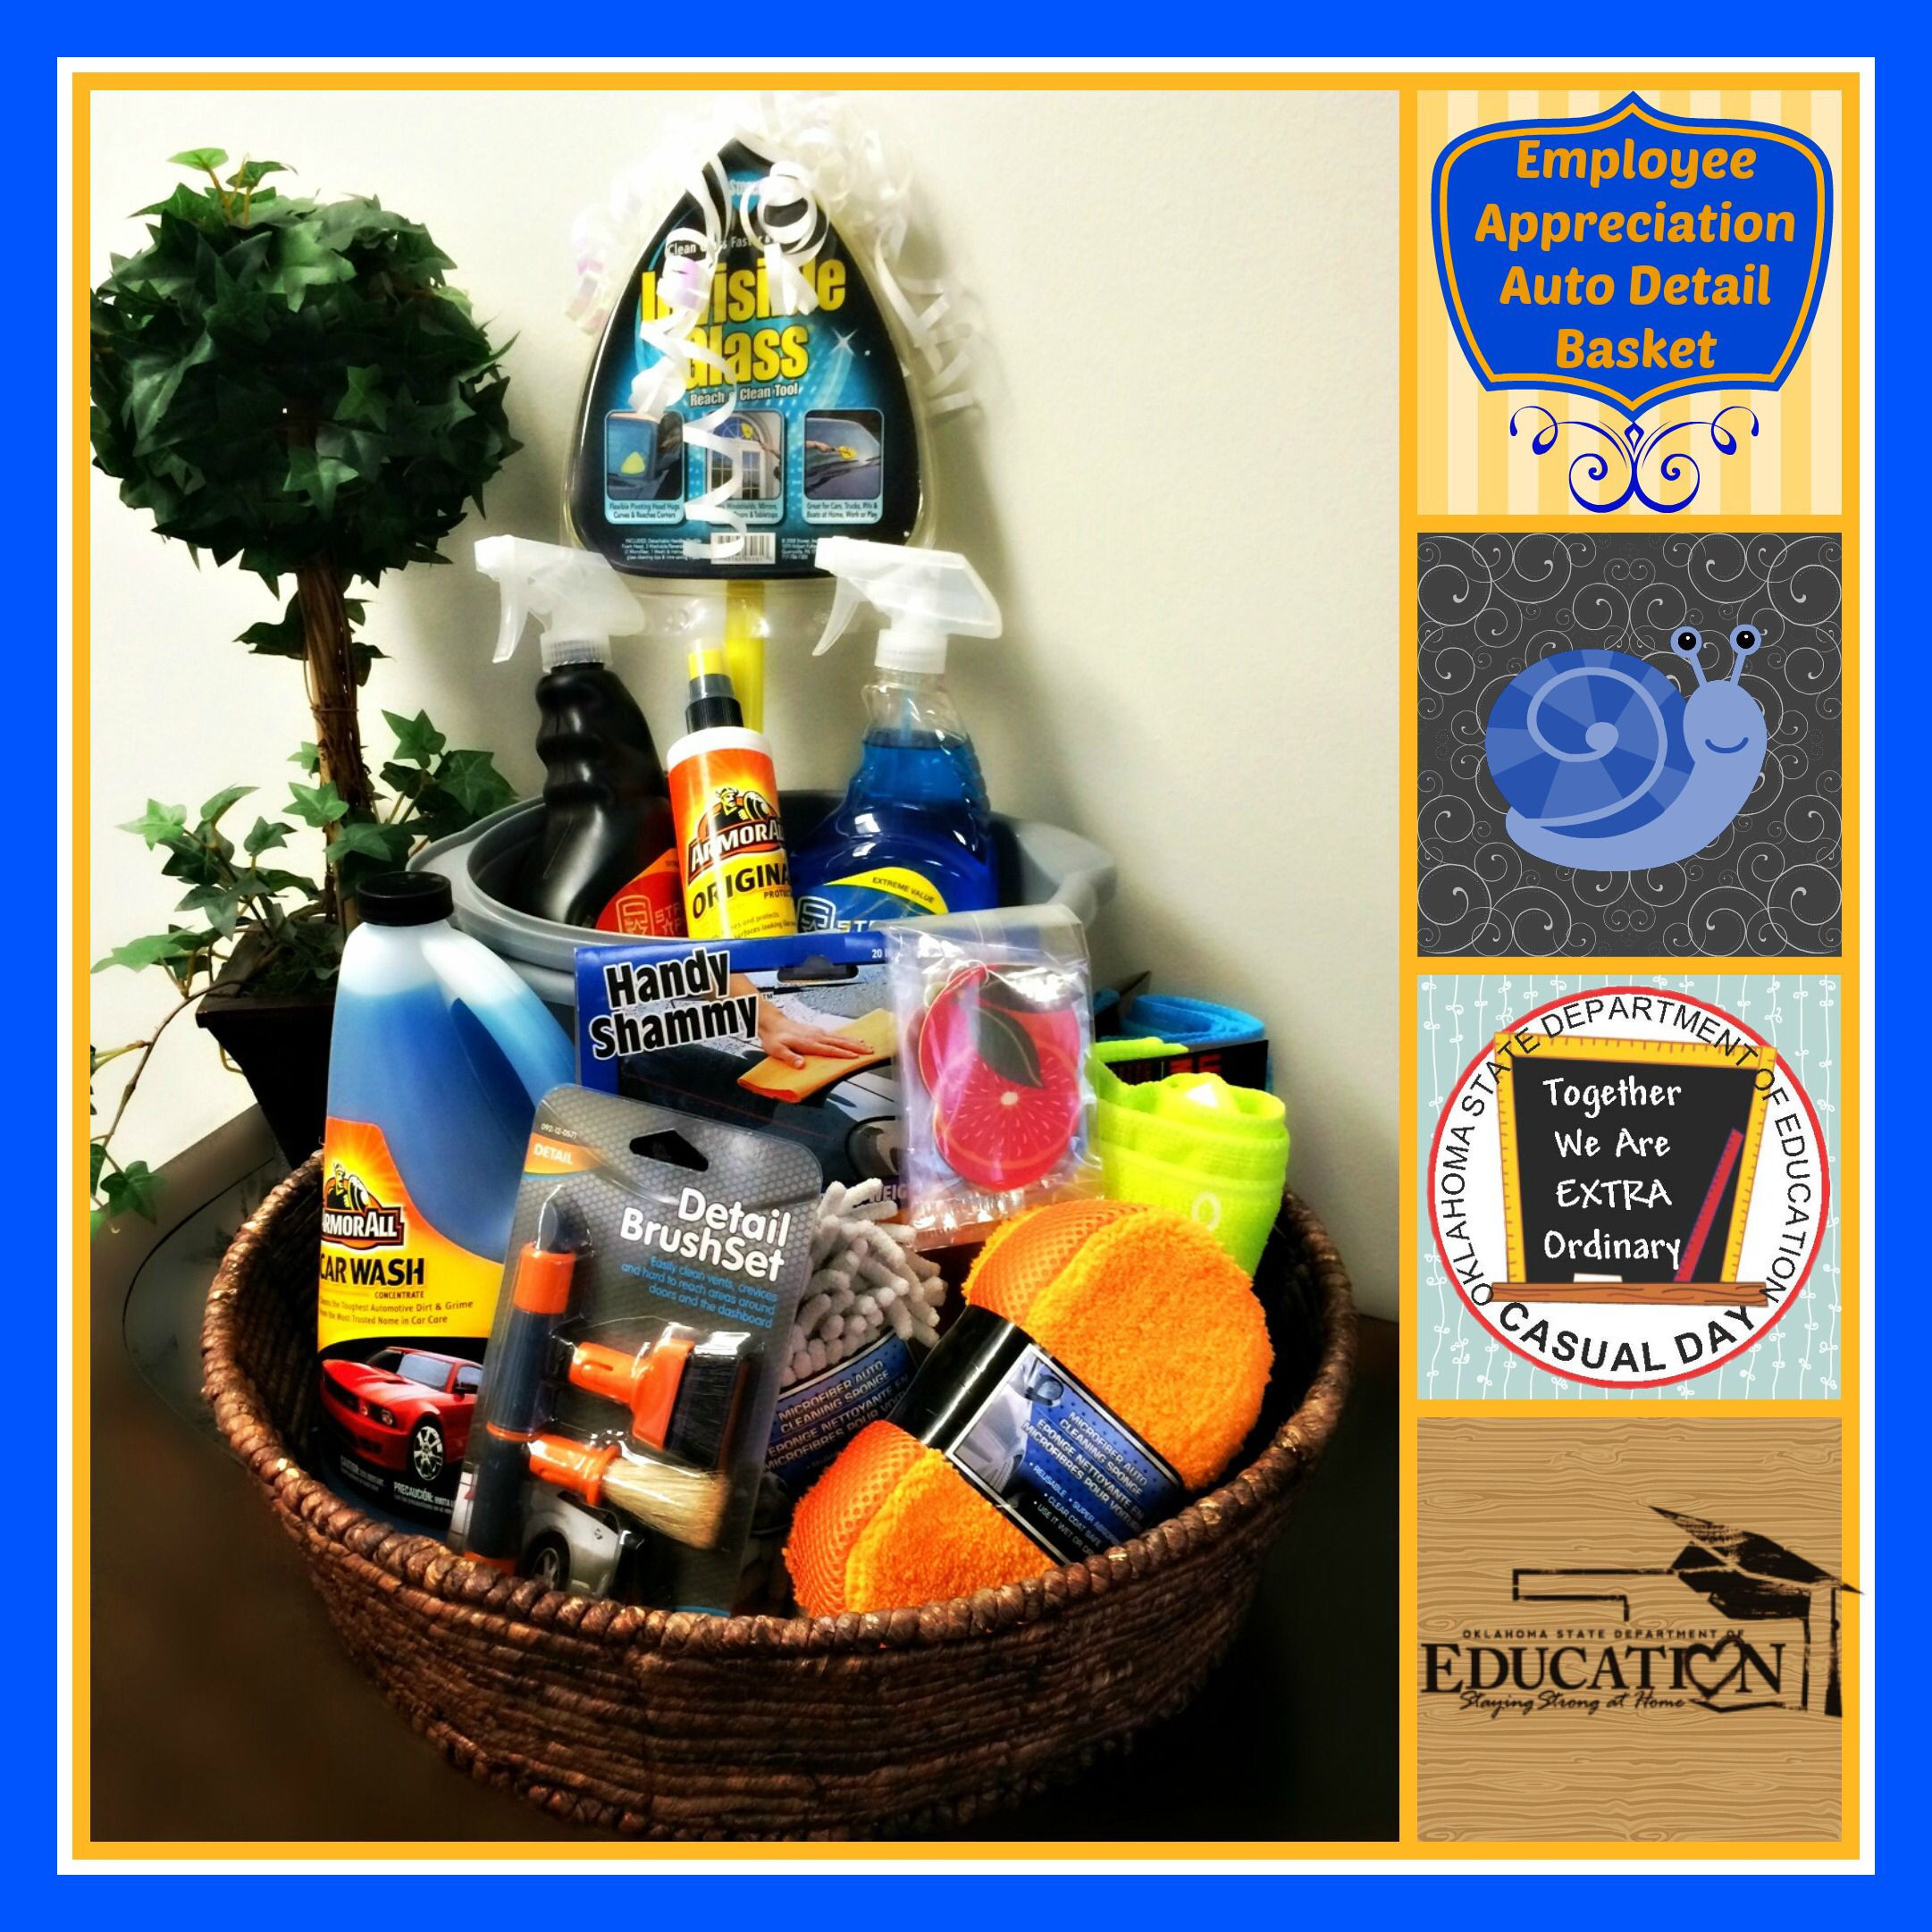 Gift Basket Ideas For Employees
 Last t basket for 2014 Employee Appreciation Month